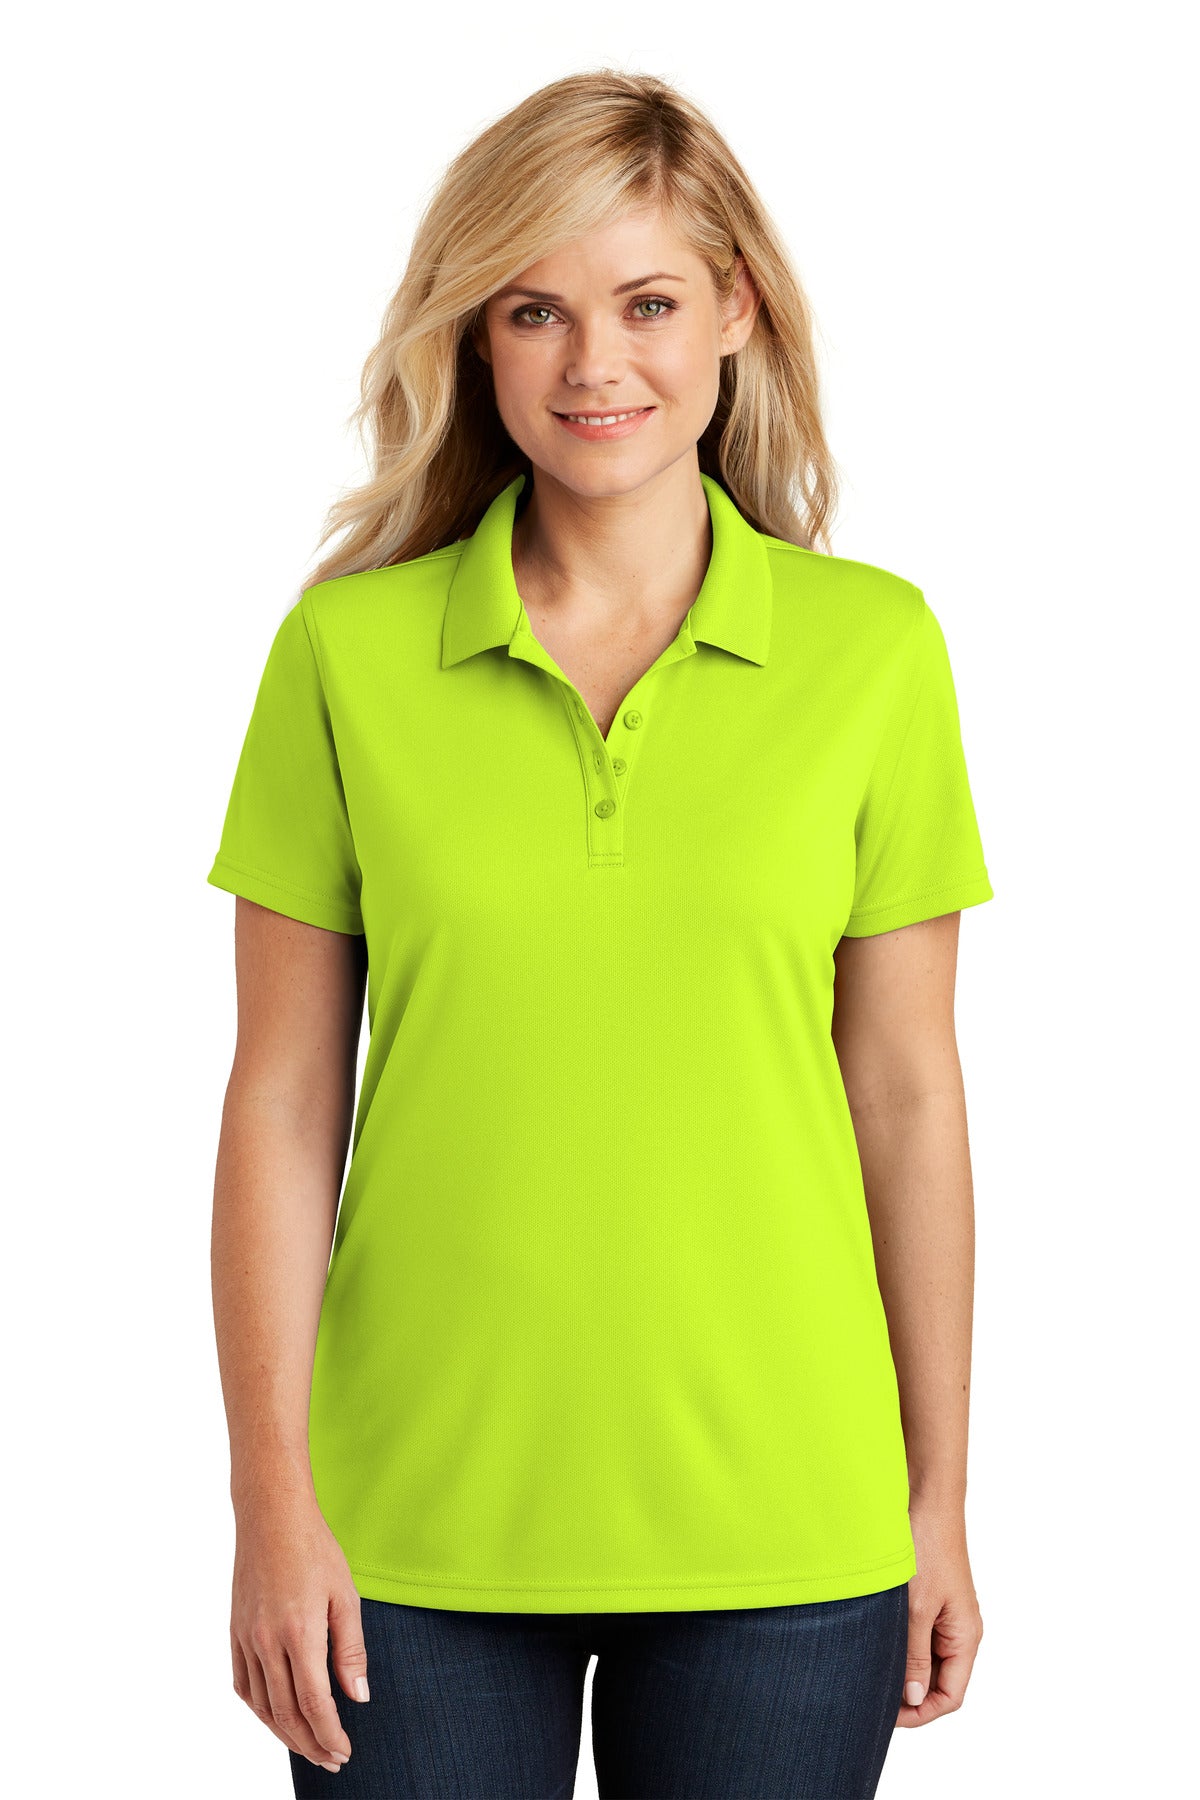 Photo of Port Authority Ladies LK110  color  Safety Yellow